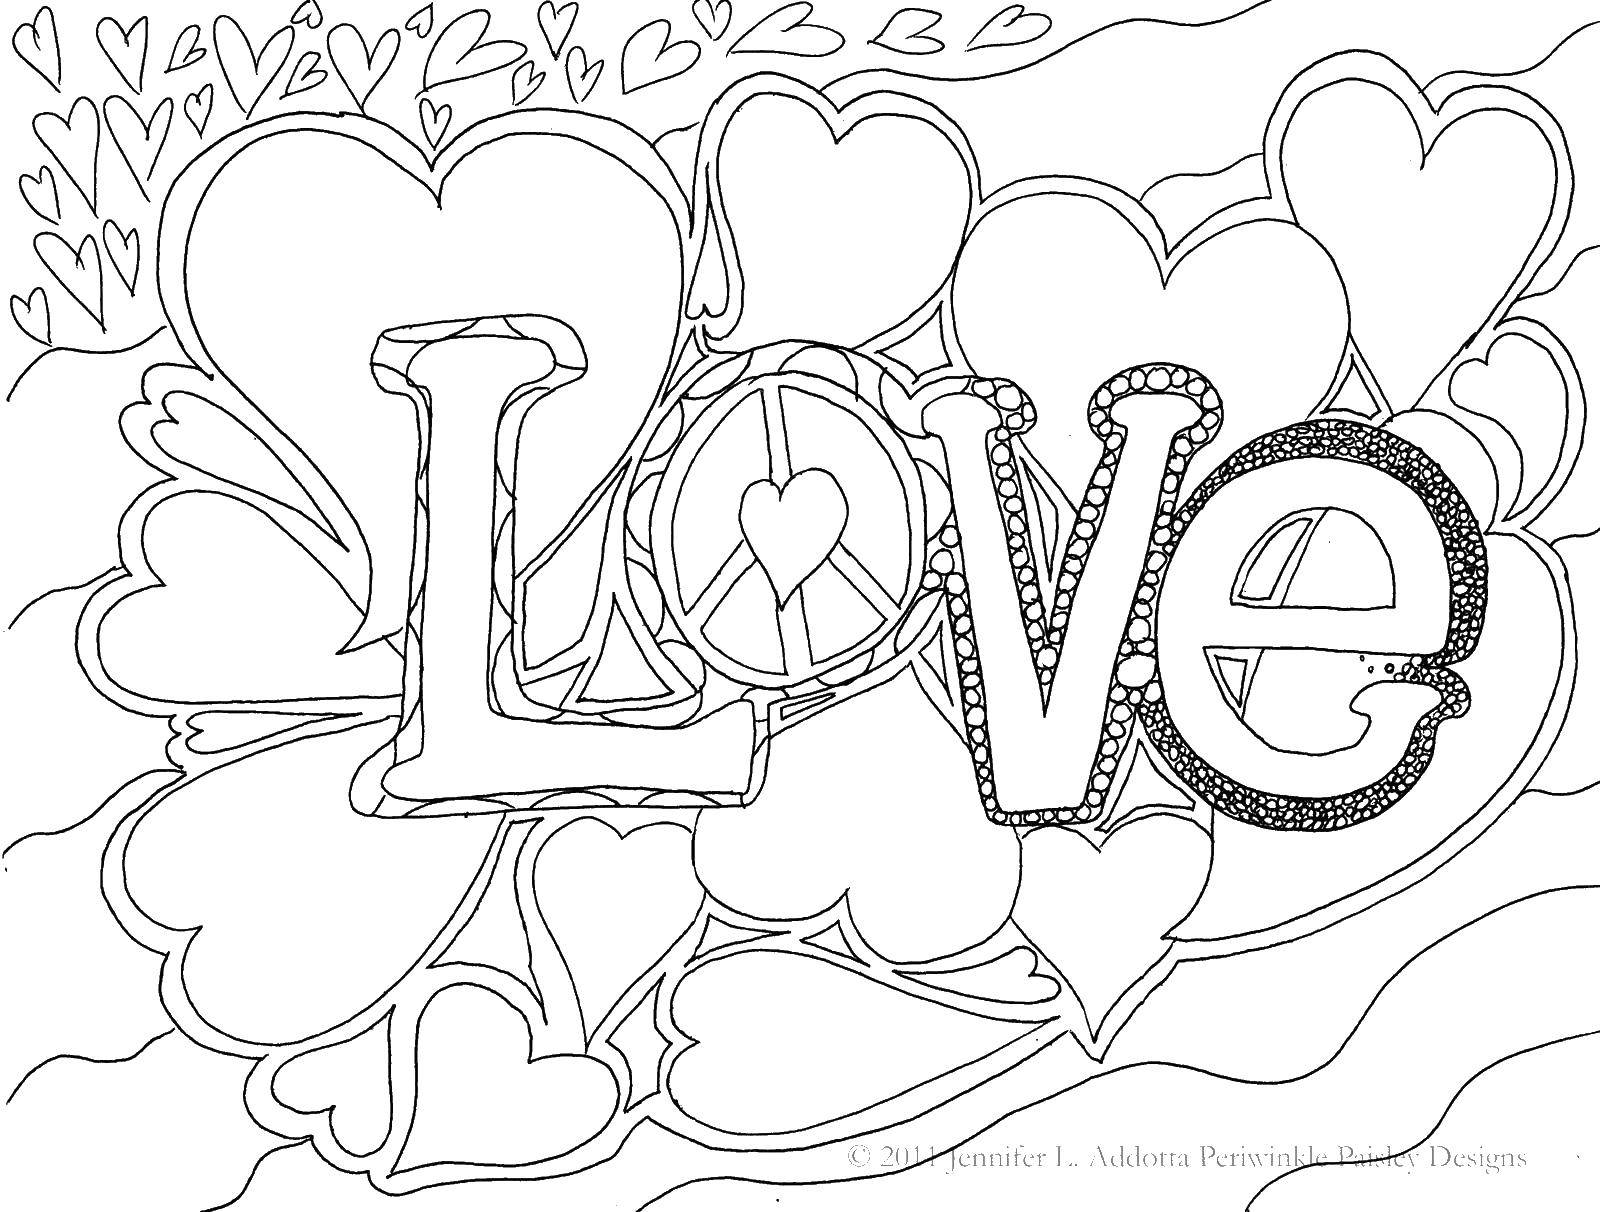 Coloring Love.. Category I love you. Tags:  love, hearts, inscriptions.